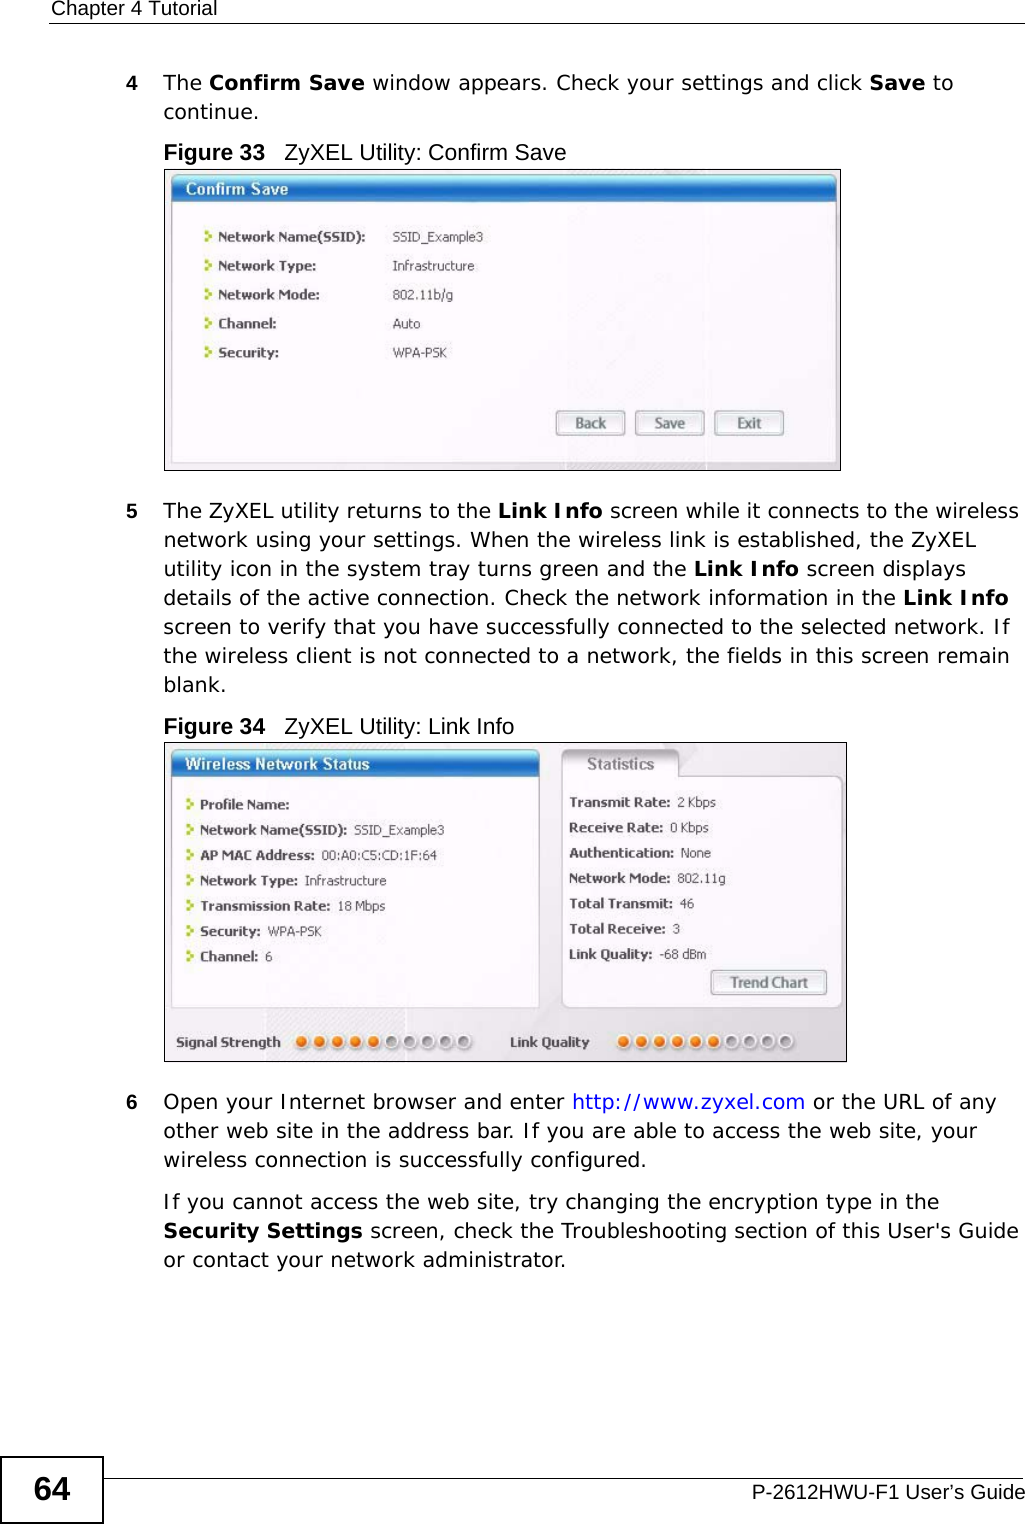 Chapter 4 TutorialP-2612HWU-F1 User’s Guide644The Confirm Save window appears. Check your settings and click Save to continue.Figure 33   ZyXEL Utility: Confirm Save5The ZyXEL utility returns to the Link Info screen while it connects to the wireless network using your settings. When the wireless link is established, the ZyXEL utility icon in the system tray turns green and the Link Info screen displays details of the active connection. Check the network information in the Link Info screen to verify that you have successfully connected to the selected network. If the wireless client is not connected to a network, the fields in this screen remain blank. Figure 34   ZyXEL Utility: Link Info 6Open your Internet browser and enter http://www.zyxel.com or the URL of any other web site in the address bar. If you are able to access the web site, your wireless connection is successfully configured. If you cannot access the web site, try changing the encryption type in the Security Settings screen, check the Troubleshooting section of this User&apos;s Guide or contact your network administrator.